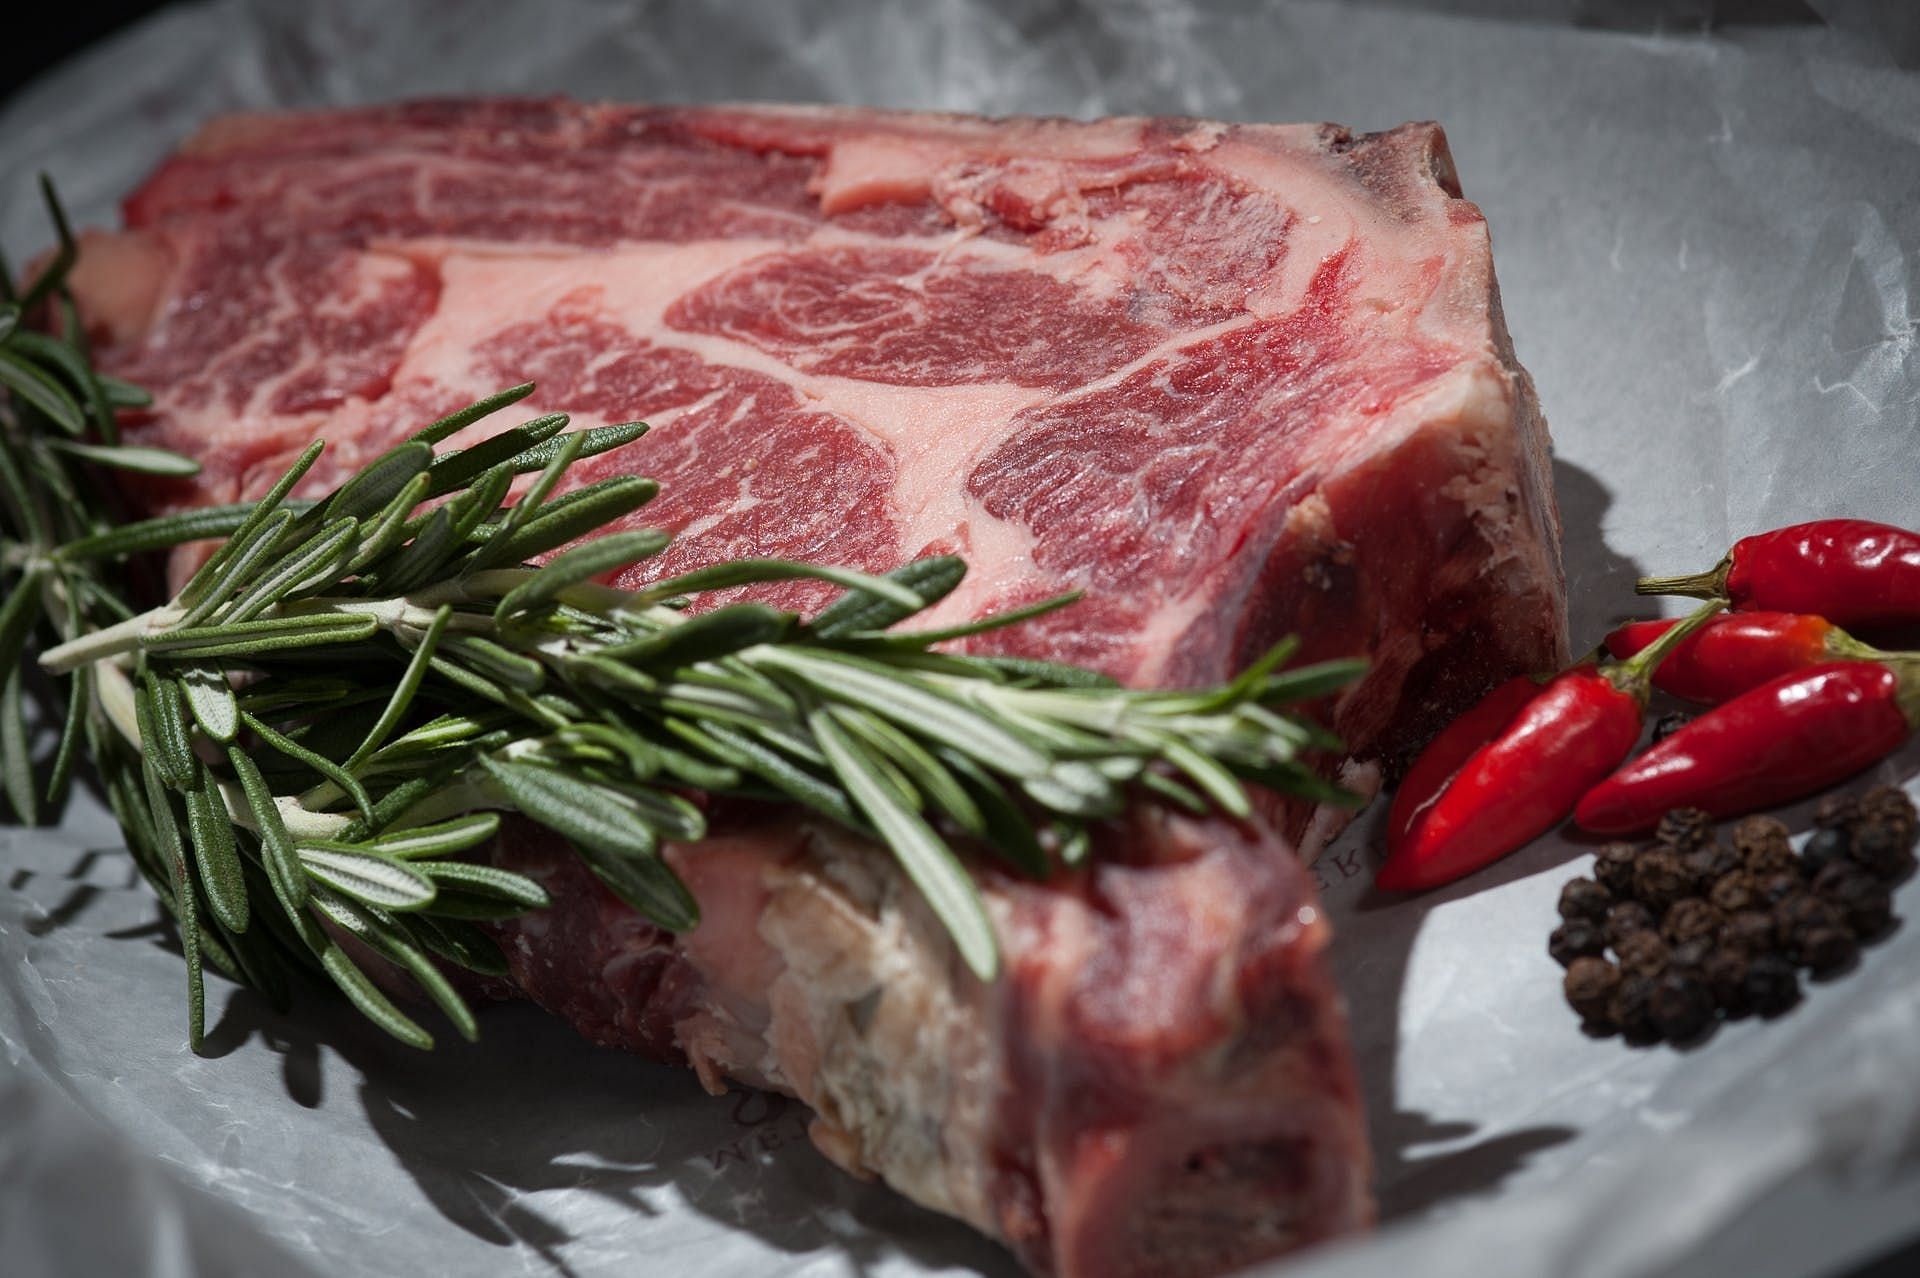 Importance of red meat as foods that increase blood in the body (image sourced via Pexels / Photo by Mali)